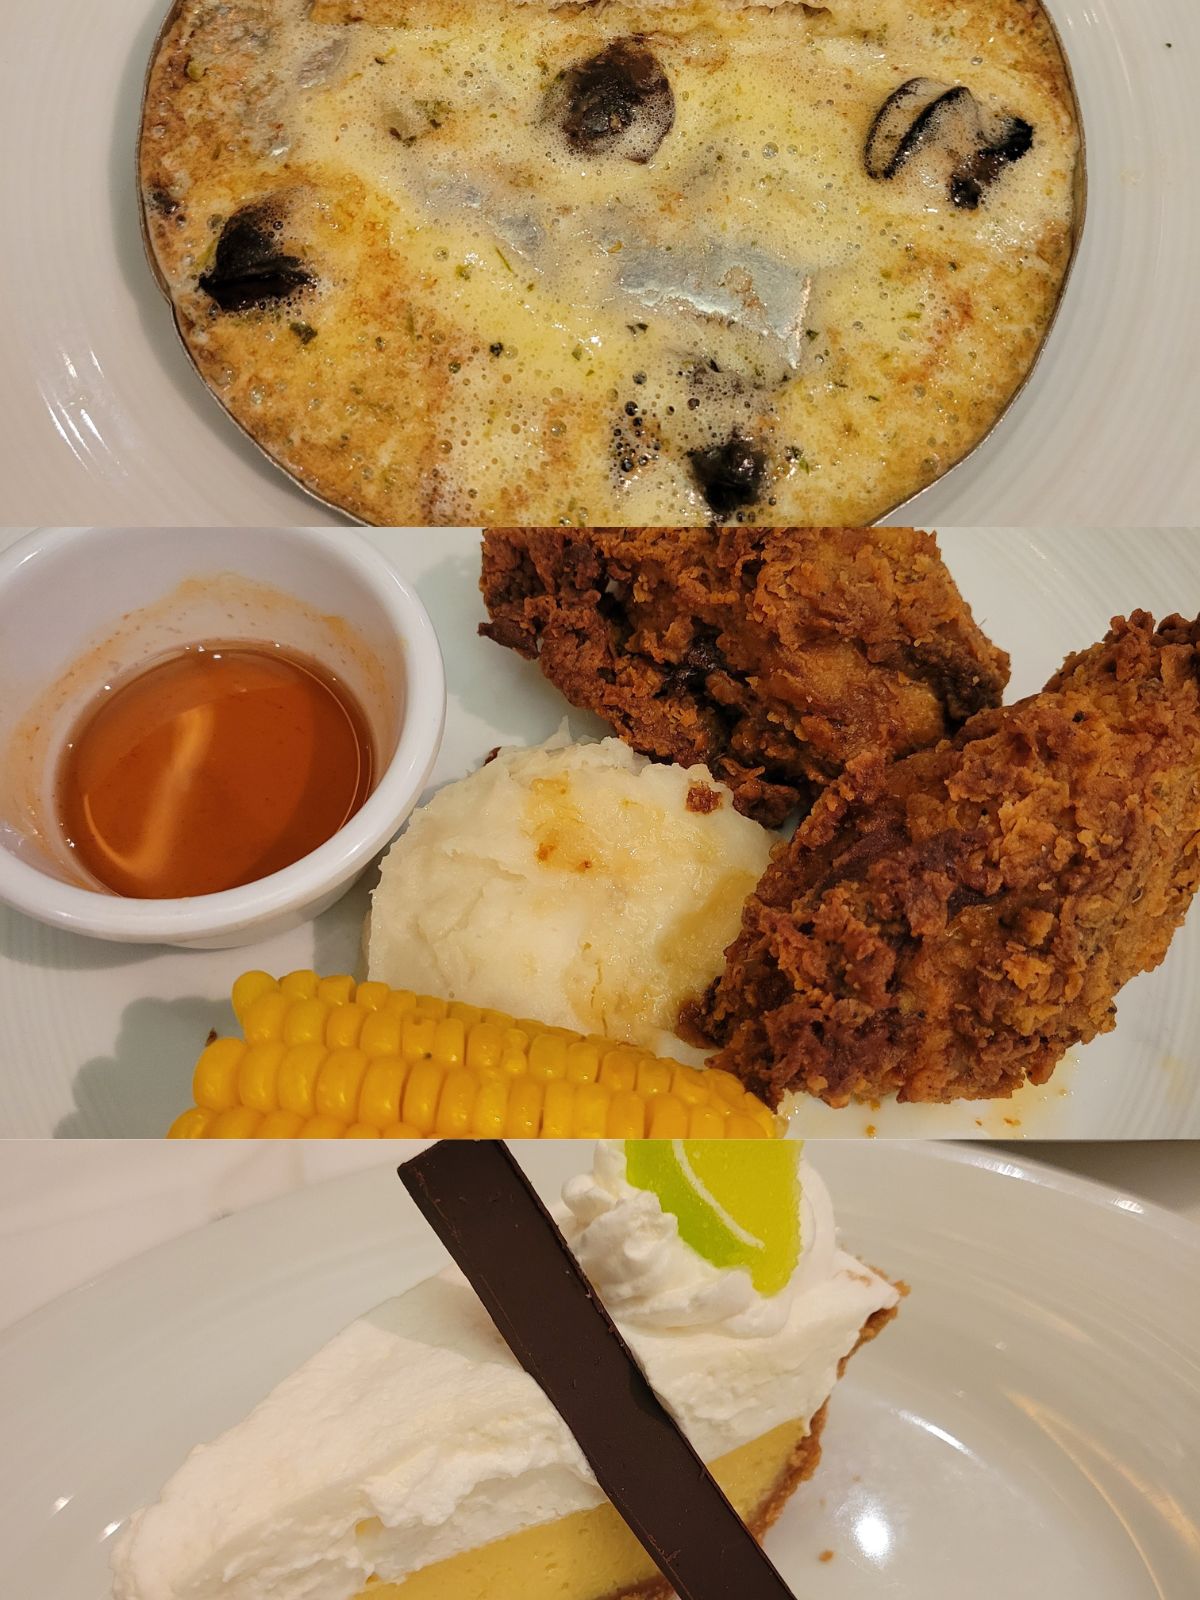 A collage of 3 different photo: a dish of escargot drowning in butter, a plate of fried chicken, mashed potatoes and a corn on the cob, and a slice of key lime pie.